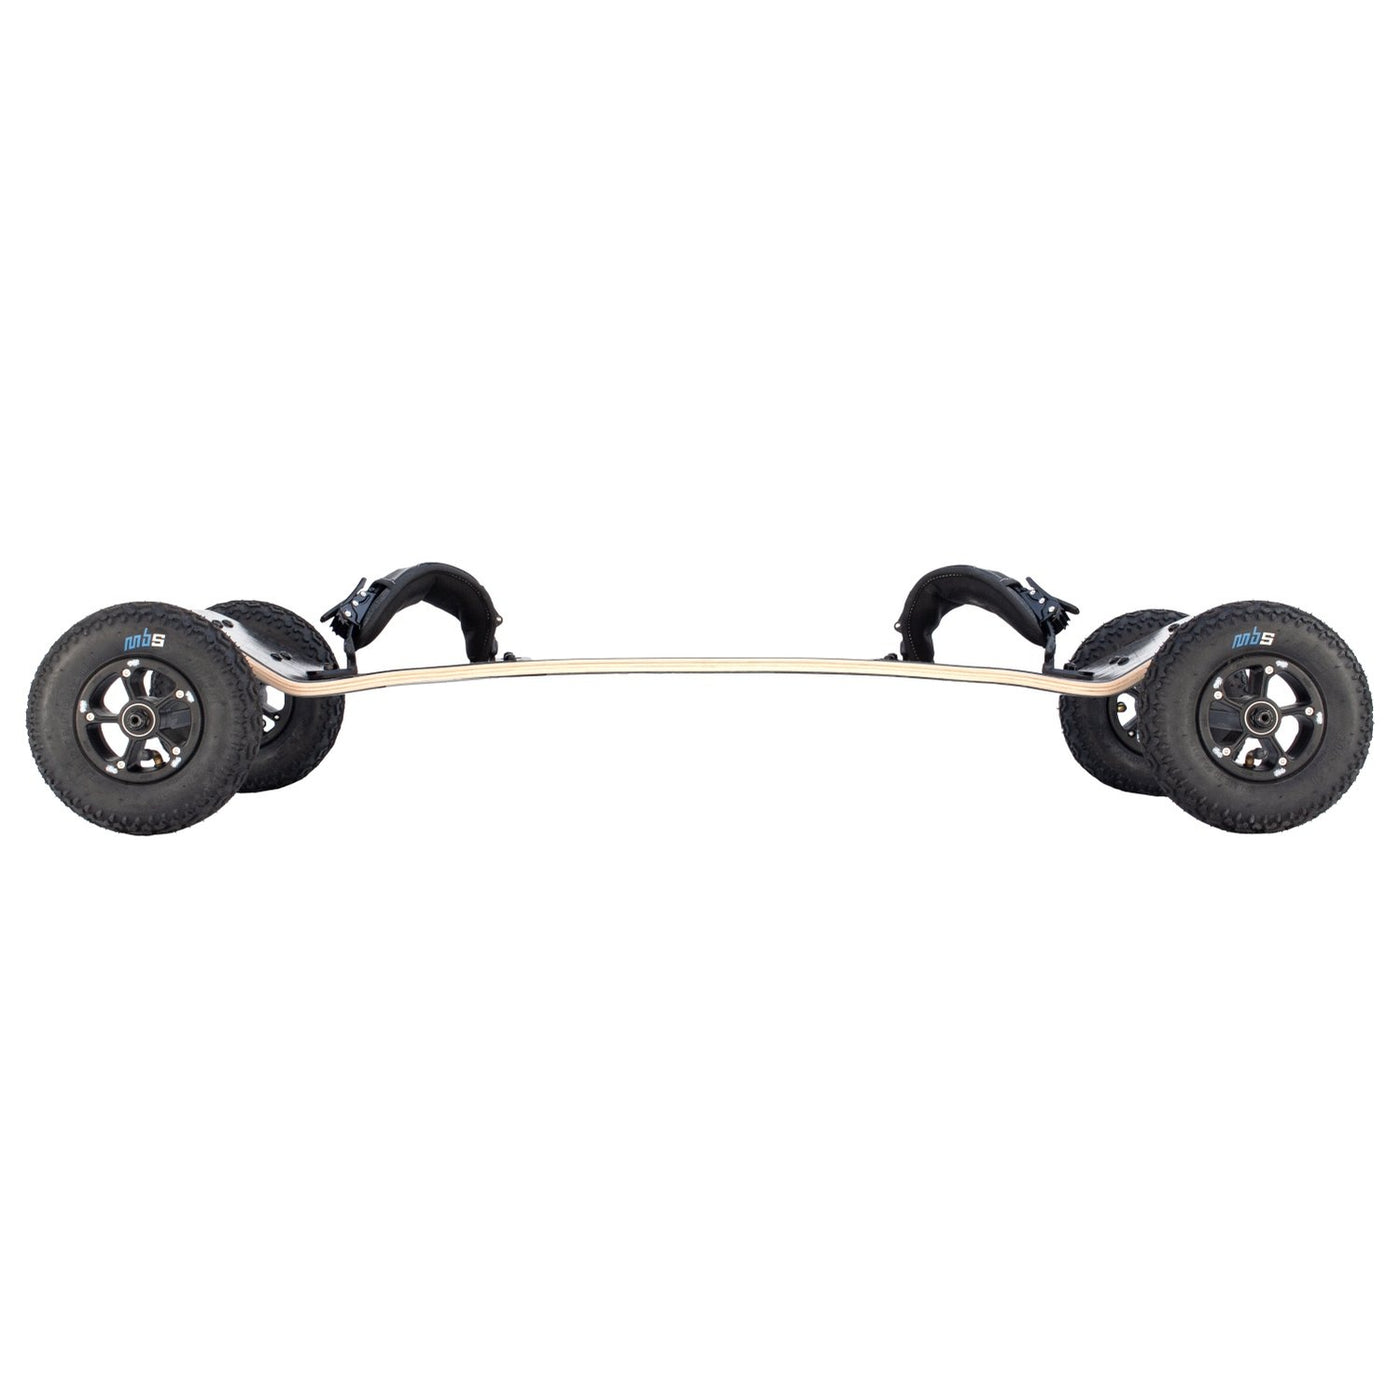 10303 - MBS Comp 95 Mountainboard - Silver Hex